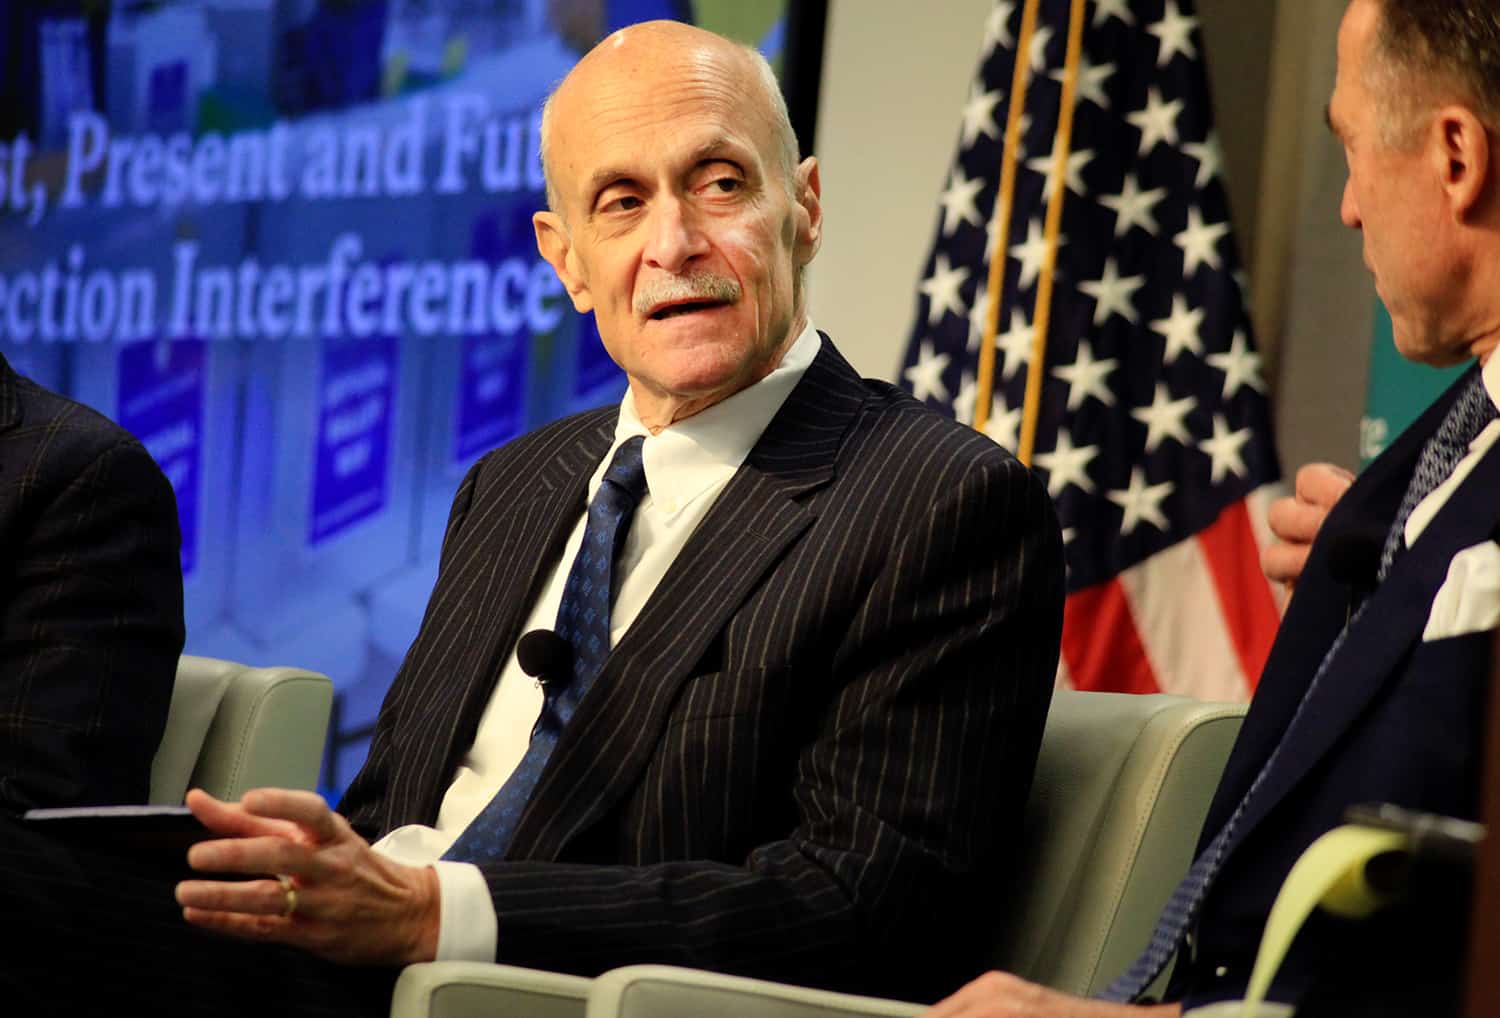 Hstoday Welcomes Former Dhs Secretary Michael Chertoff To Lineup Of